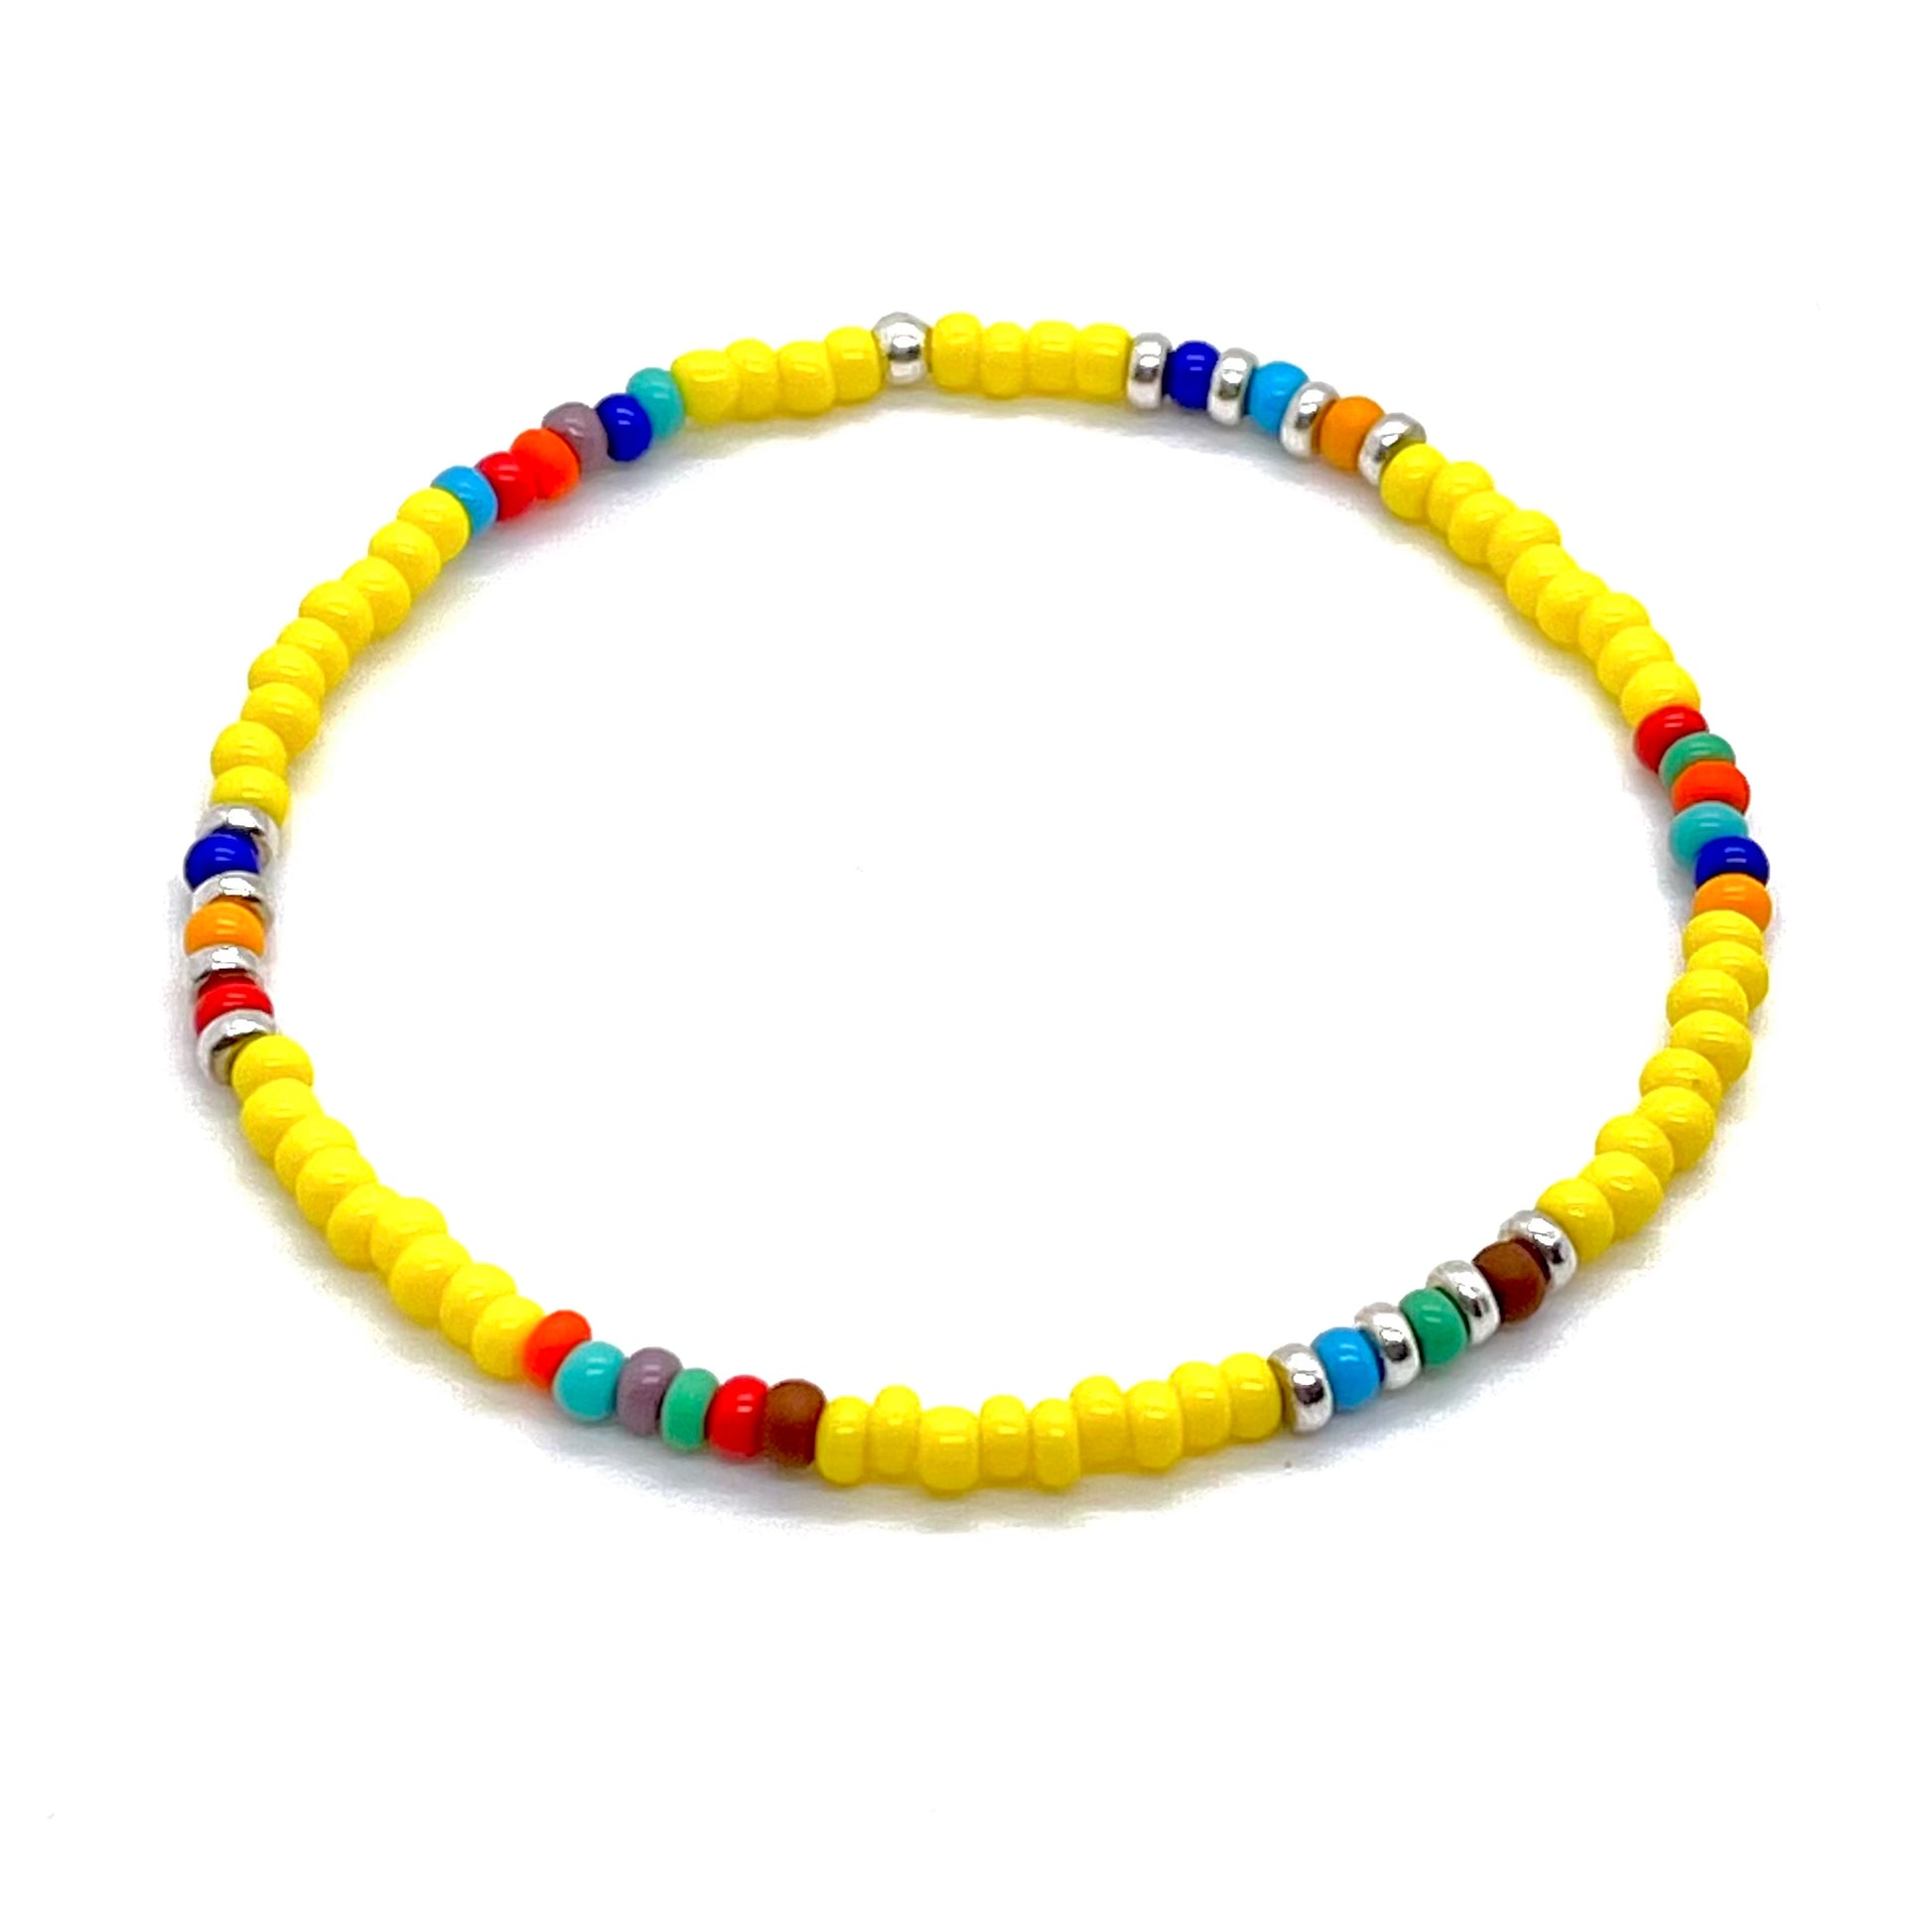 Men's summer bracelet with yellow beads and bright accent beads in assorted colors. Simple stretch bracelet.